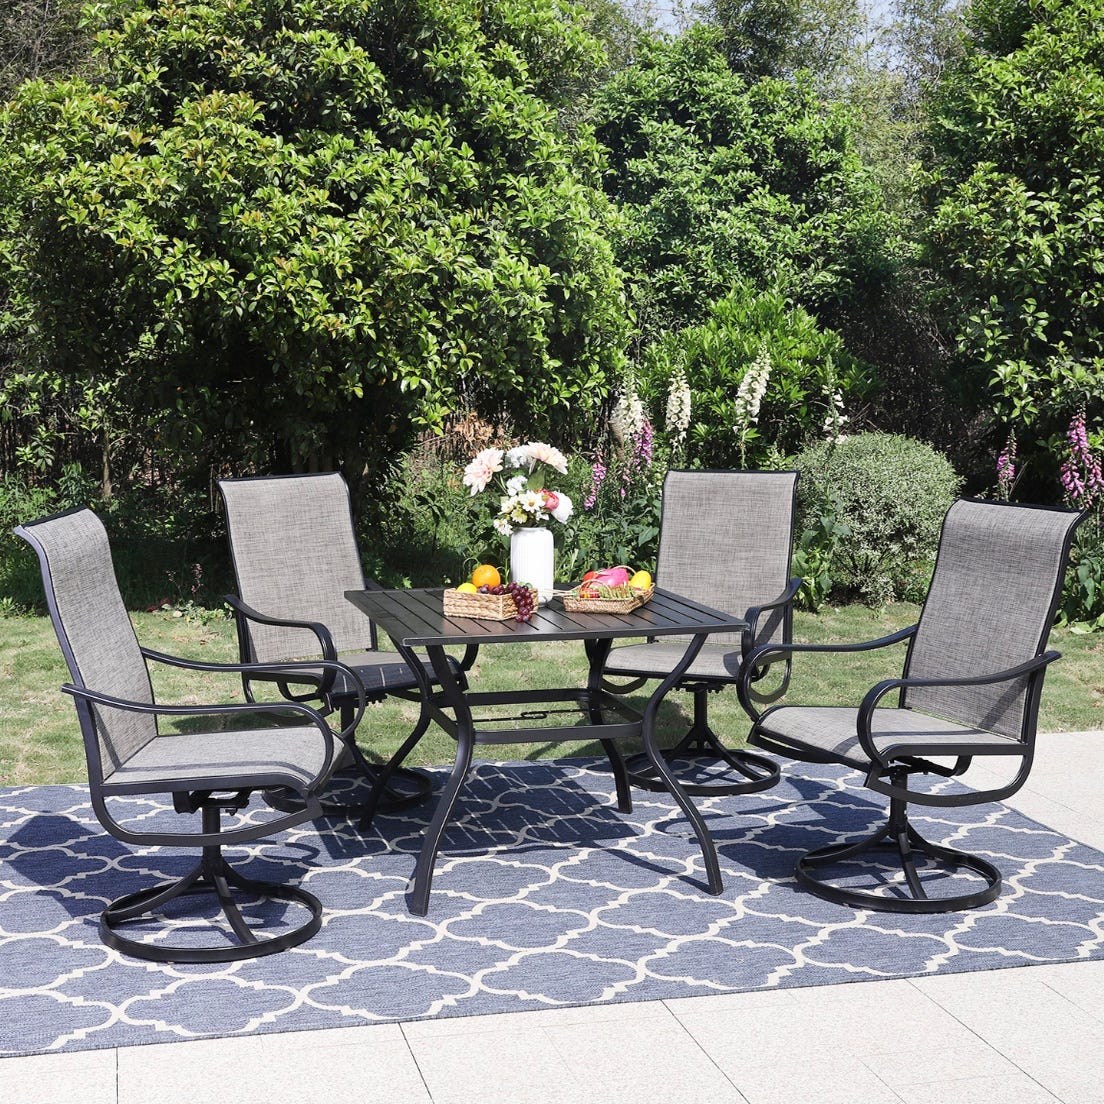 A patio furniture set with four chairs and a rectangular table, displayed outdoors on a patterned rug.